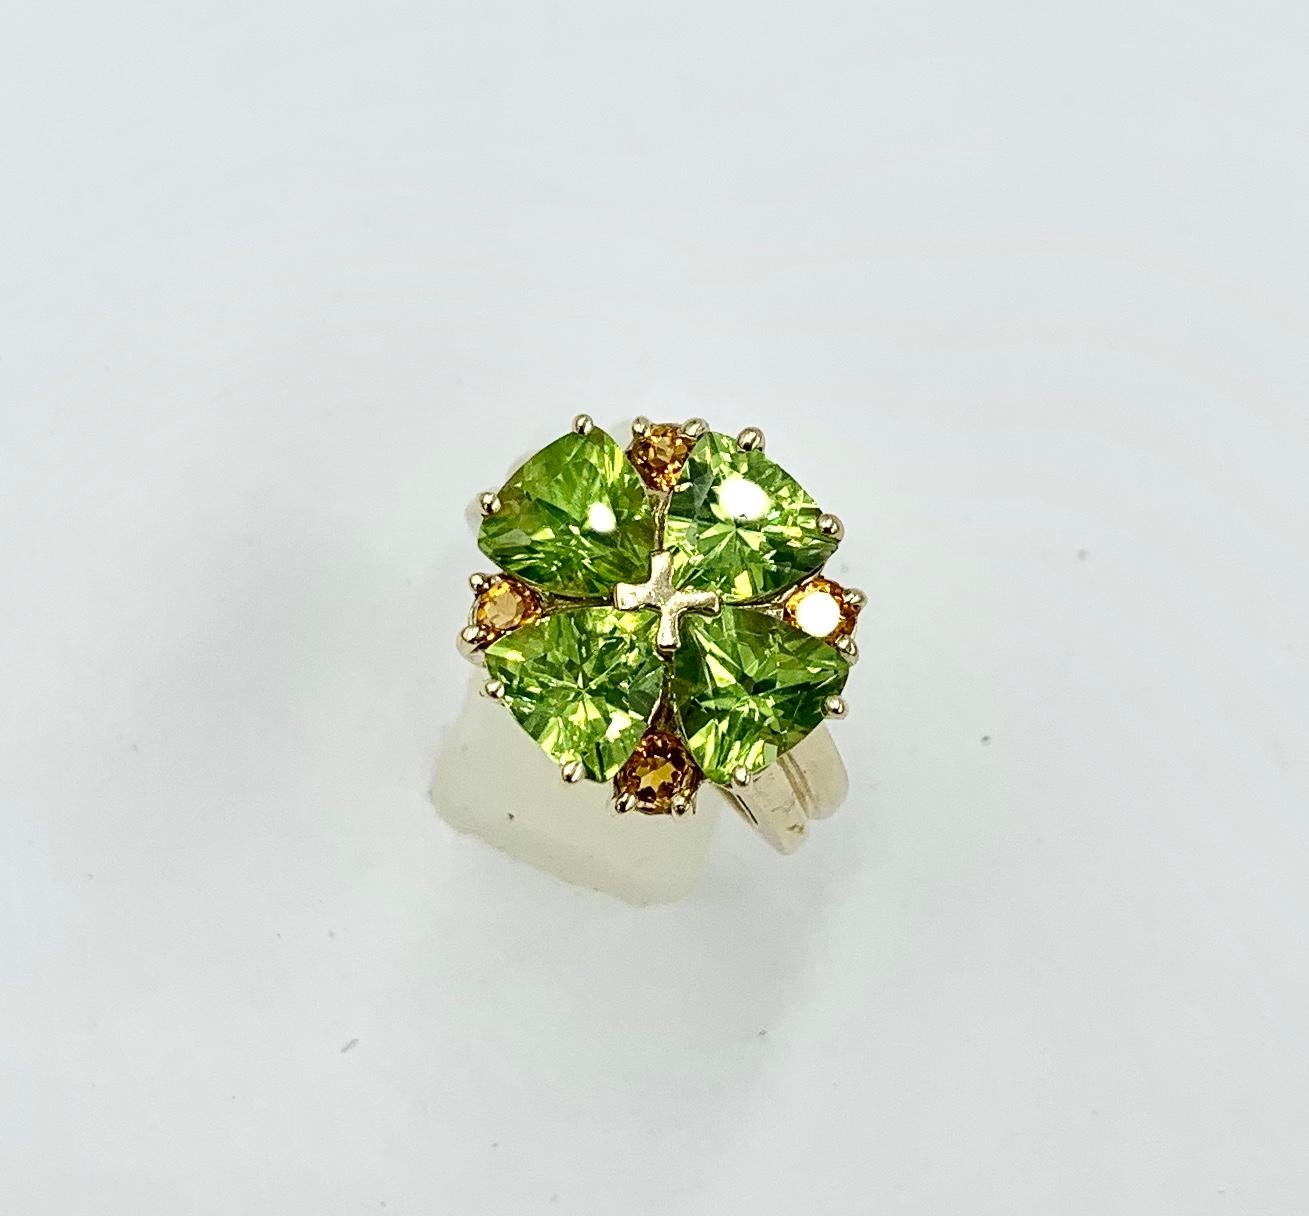 A stunning Ring set with four heart shaped Peridot gems of great beauty.  The Peridot Hearts are accented by four round Citrine gems in this sparkling and joyful Retro Ring in 14 Karat Yellow Gold.  From the collection of one of New York's favorite